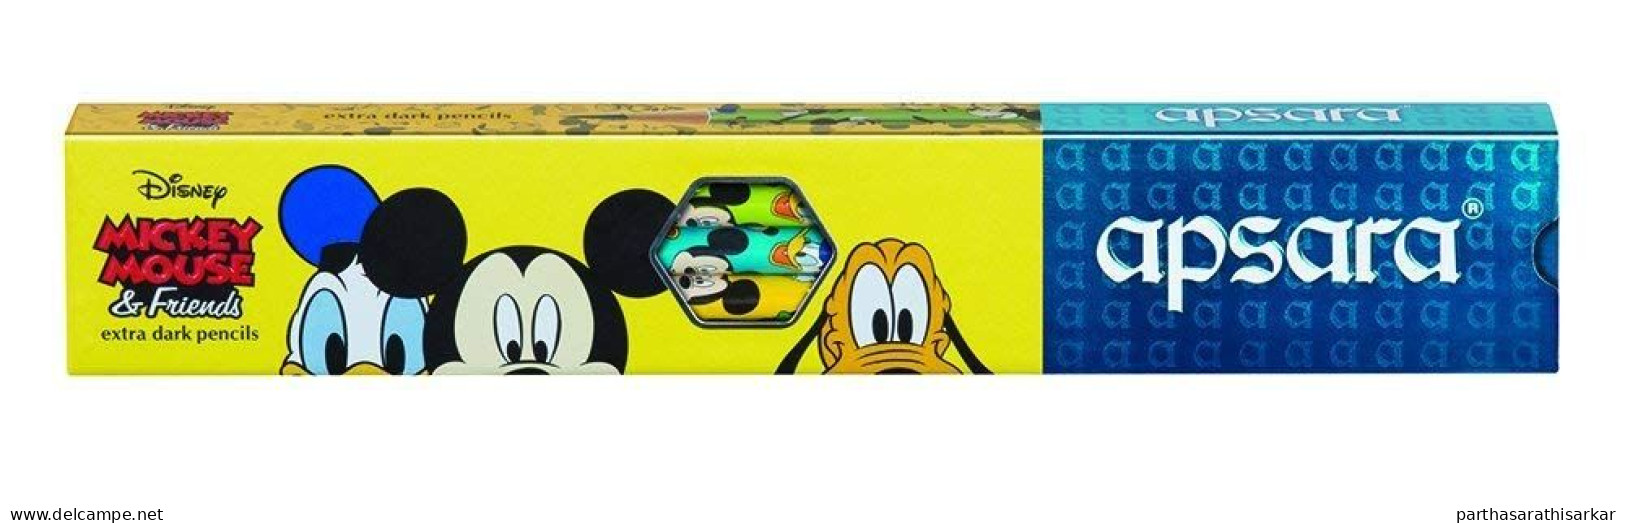 MICKY MOUSE DISNEY PENCILS FROM INDIAN BRAND APSARA SET OF 5 PENCILS (2 SETS IN A PACK) - Timbri